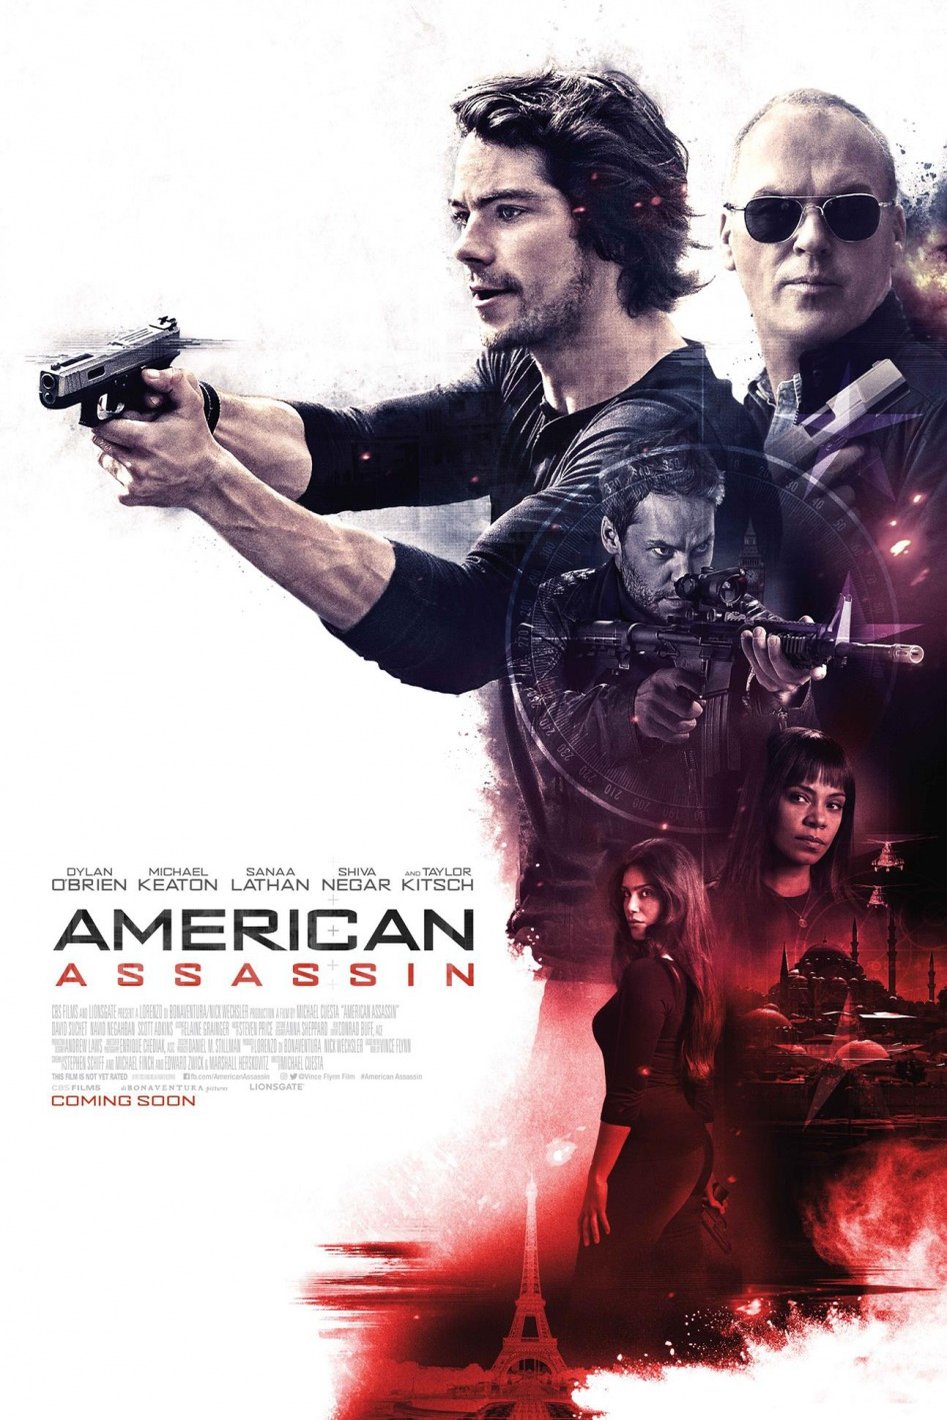 Poster of the movie American Assassin